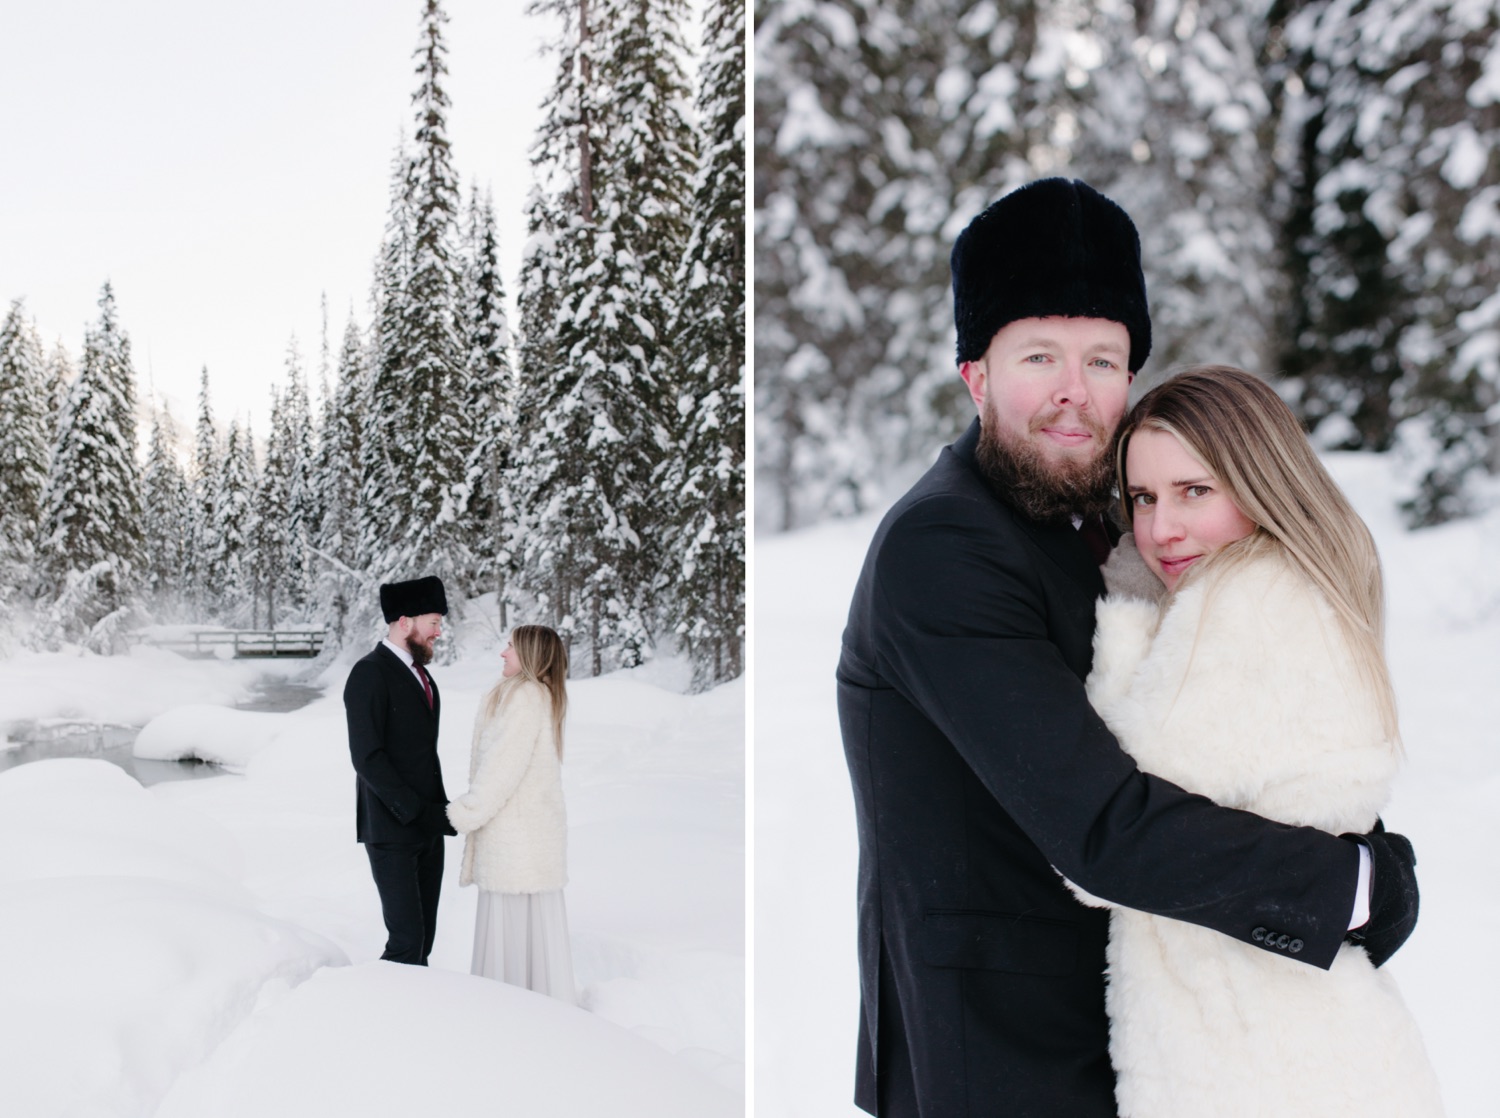 Winter wedding portraits at Emerald Lake Lodge with bride wearing white faux fur jacket and groom a vintage Canadian army parktown fur hat